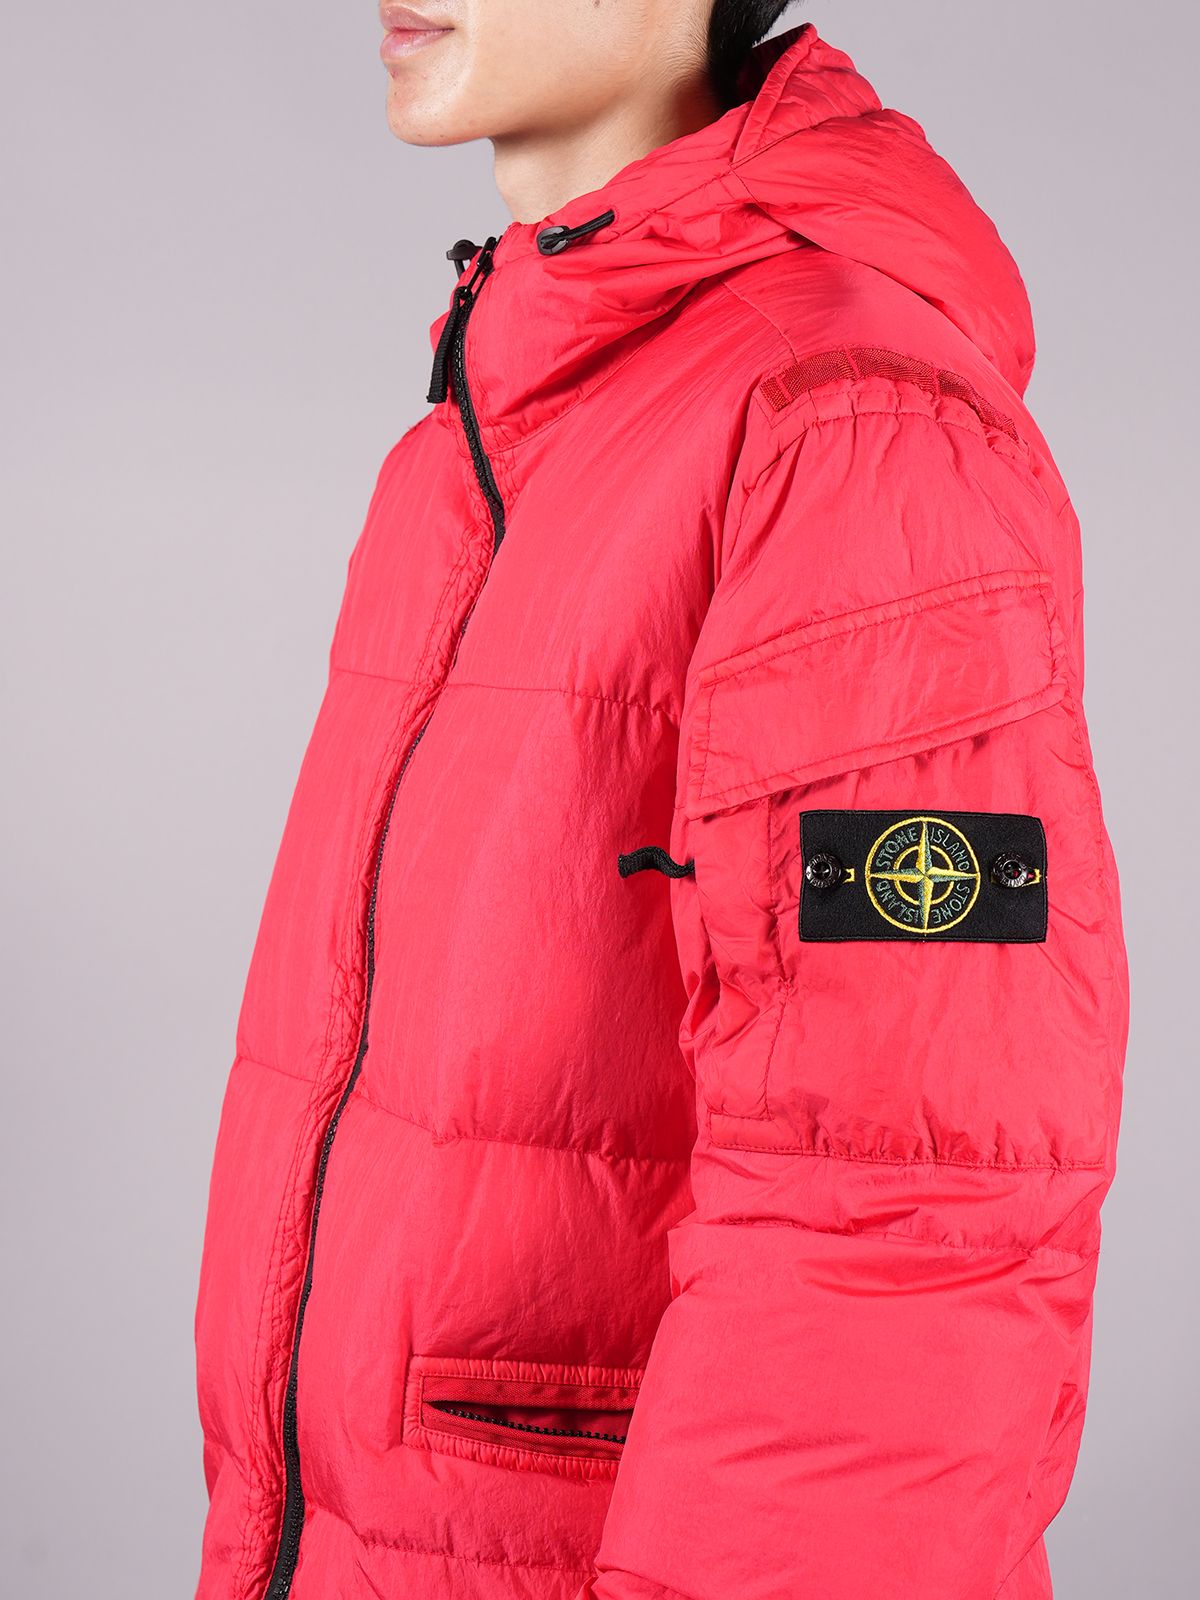 STONE ISLAND - 【残りわずか】 GARMENT DYED CRINKLE REPS R-NY